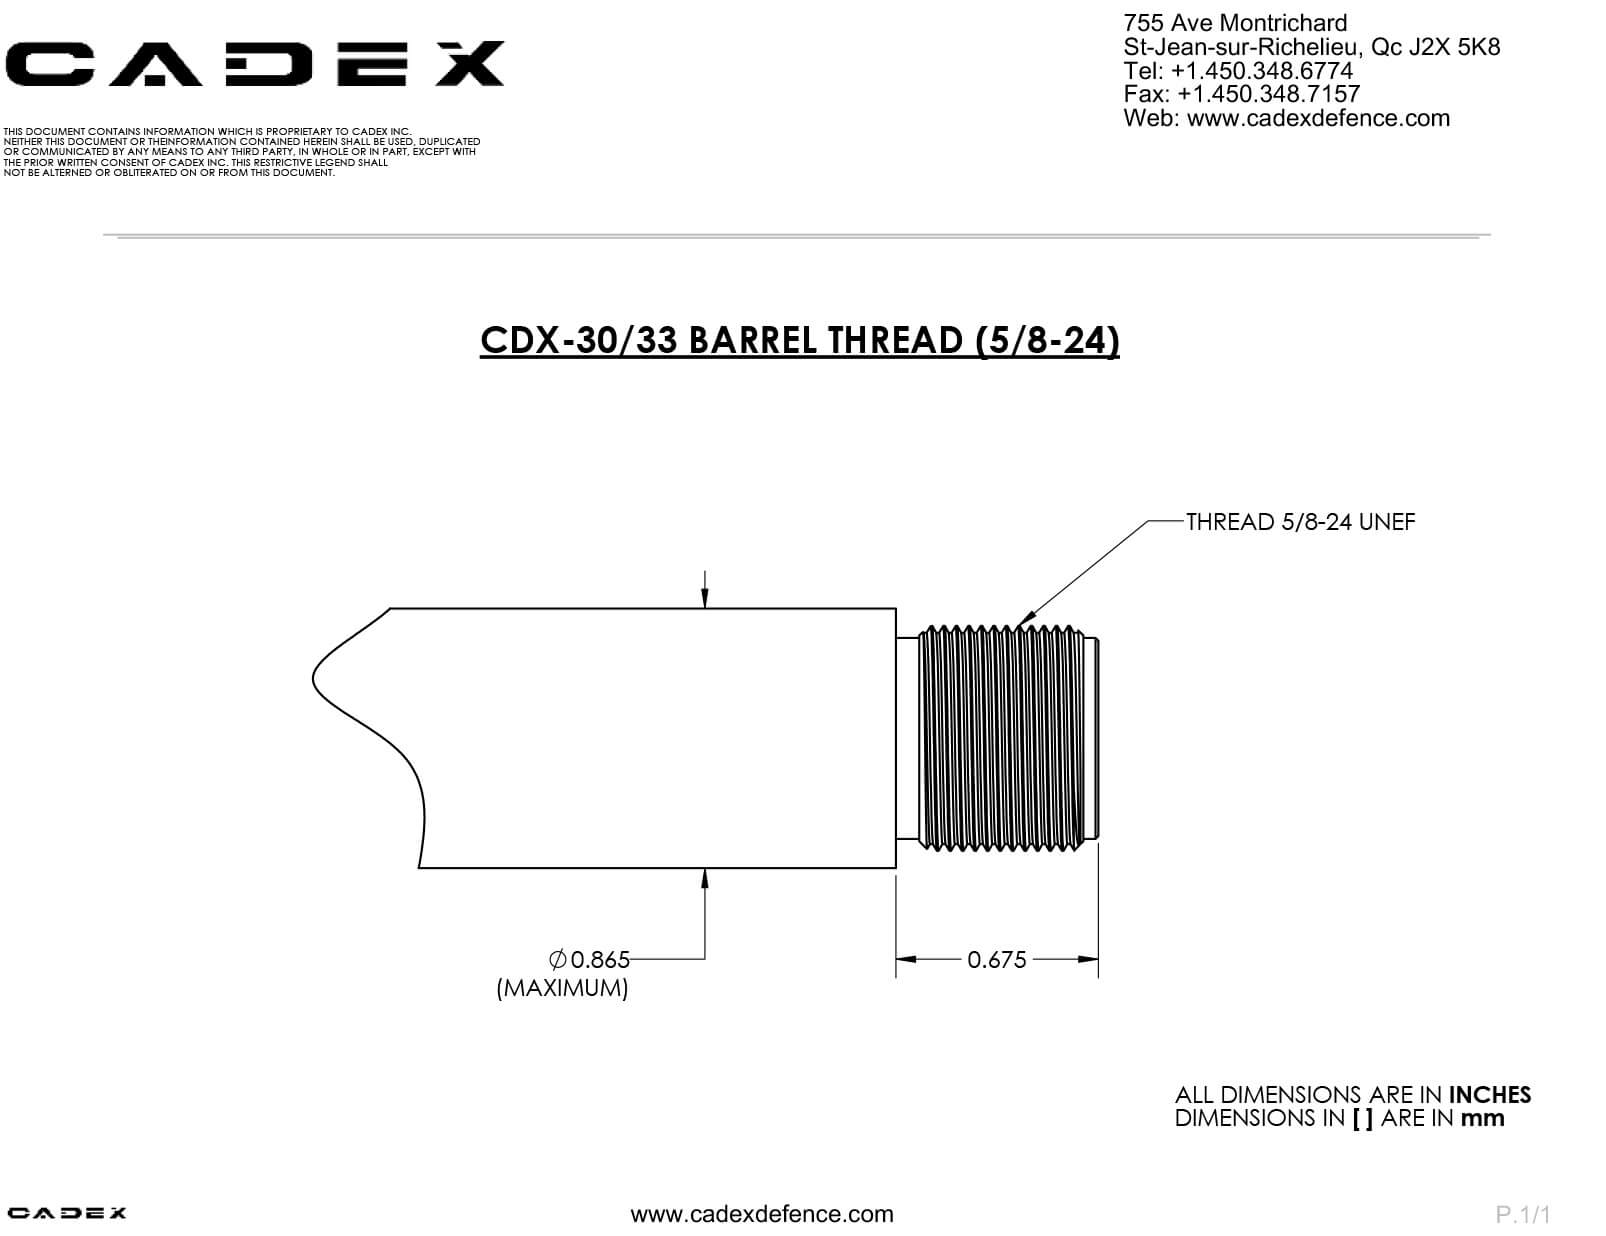 Cadex Defence on X: Get yourself a MX1 muzzle brake and it will